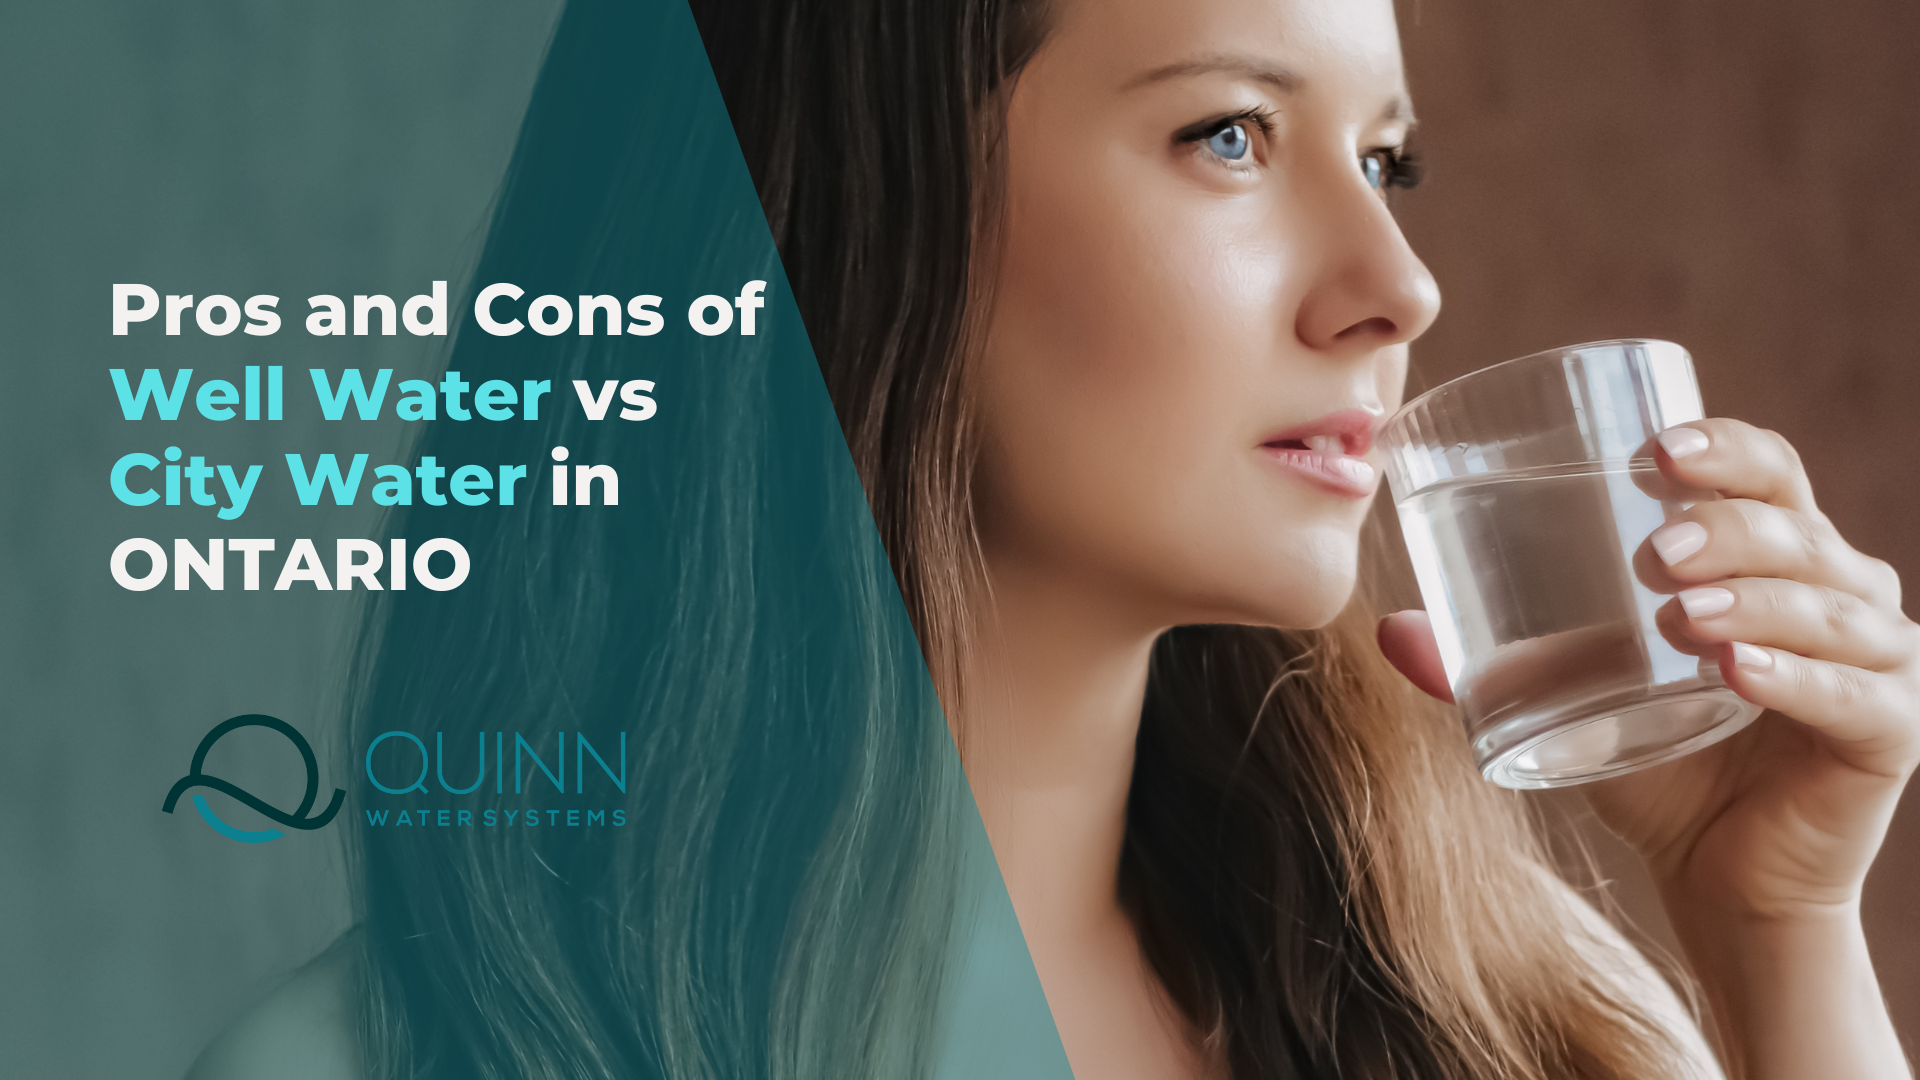 Pros and cons of Well water vs City water